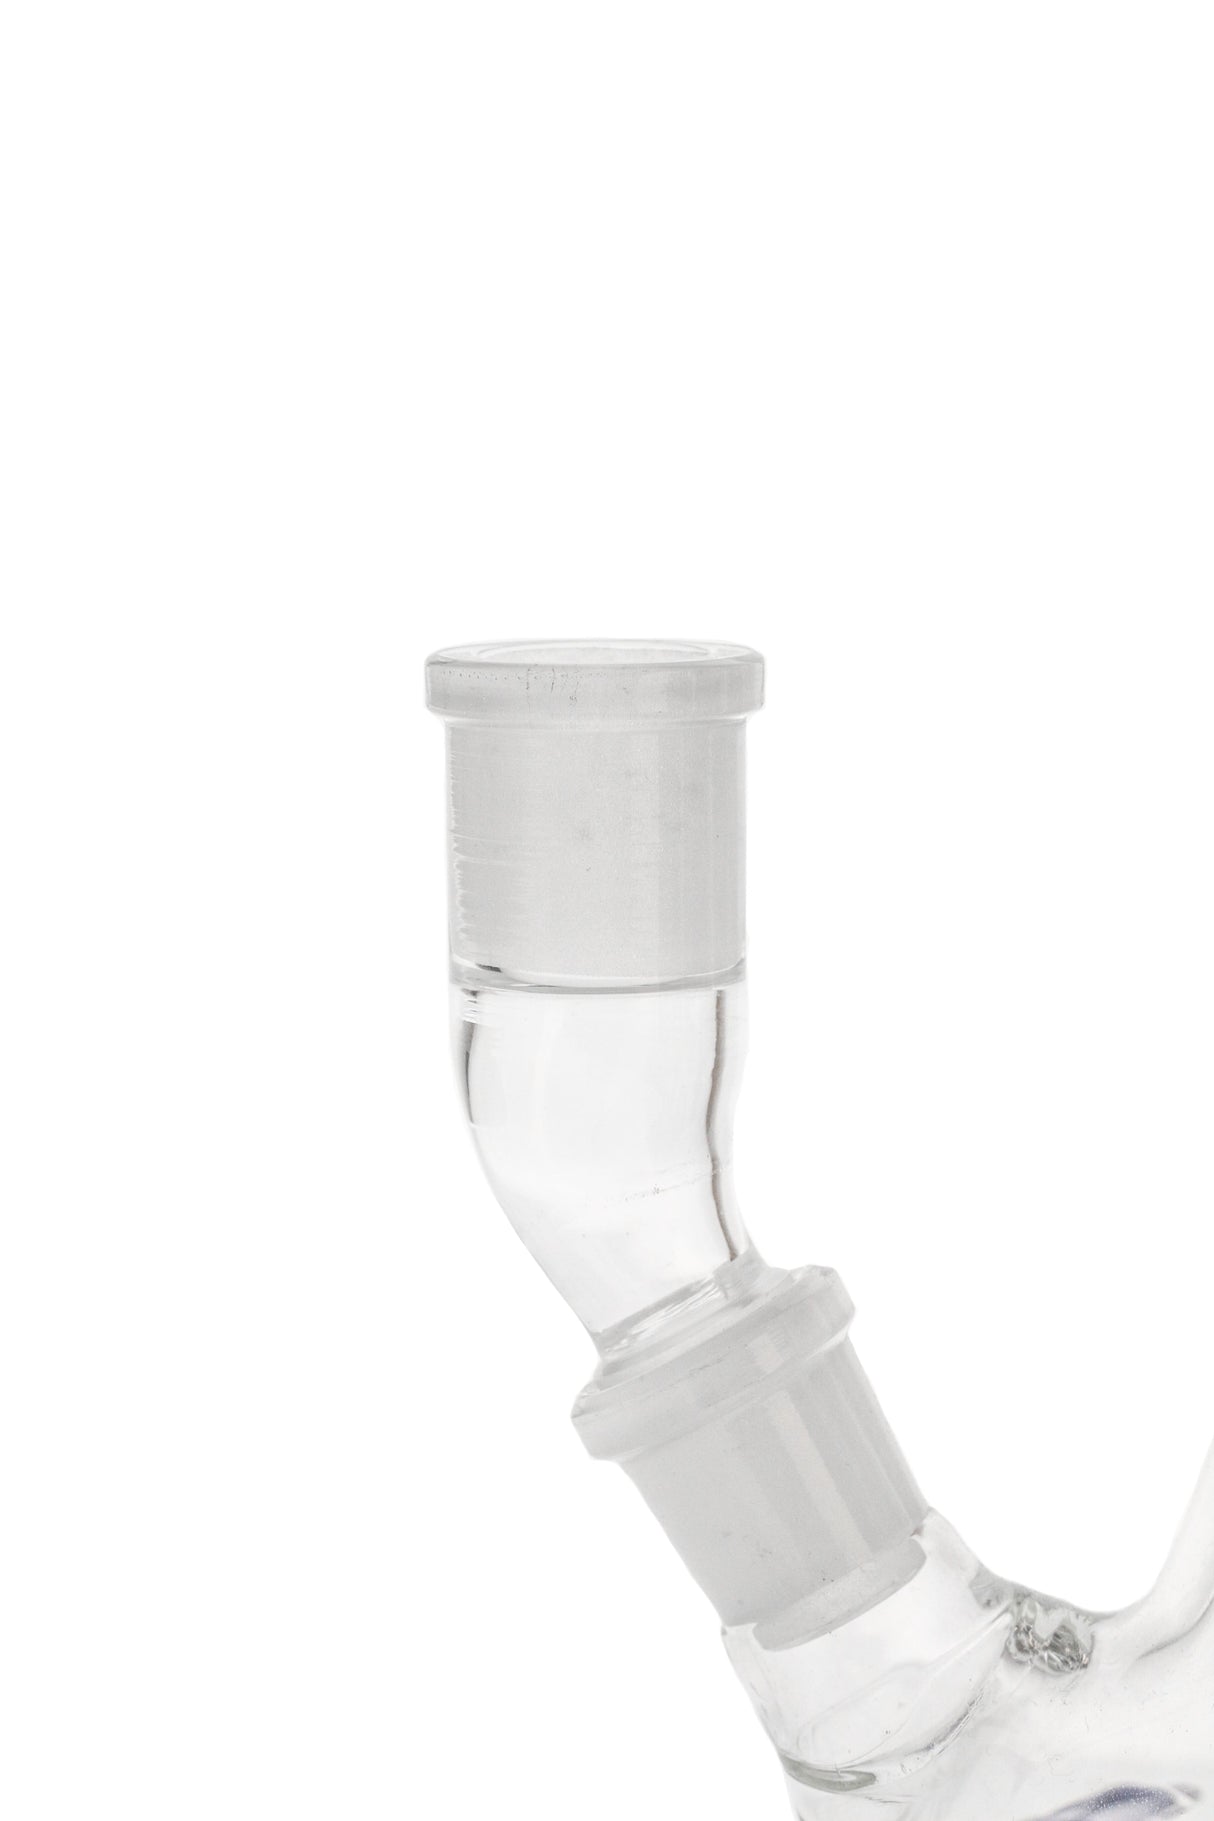 TAG Quartz Angle Adapter for Bongs, Clear, Side View on White Background